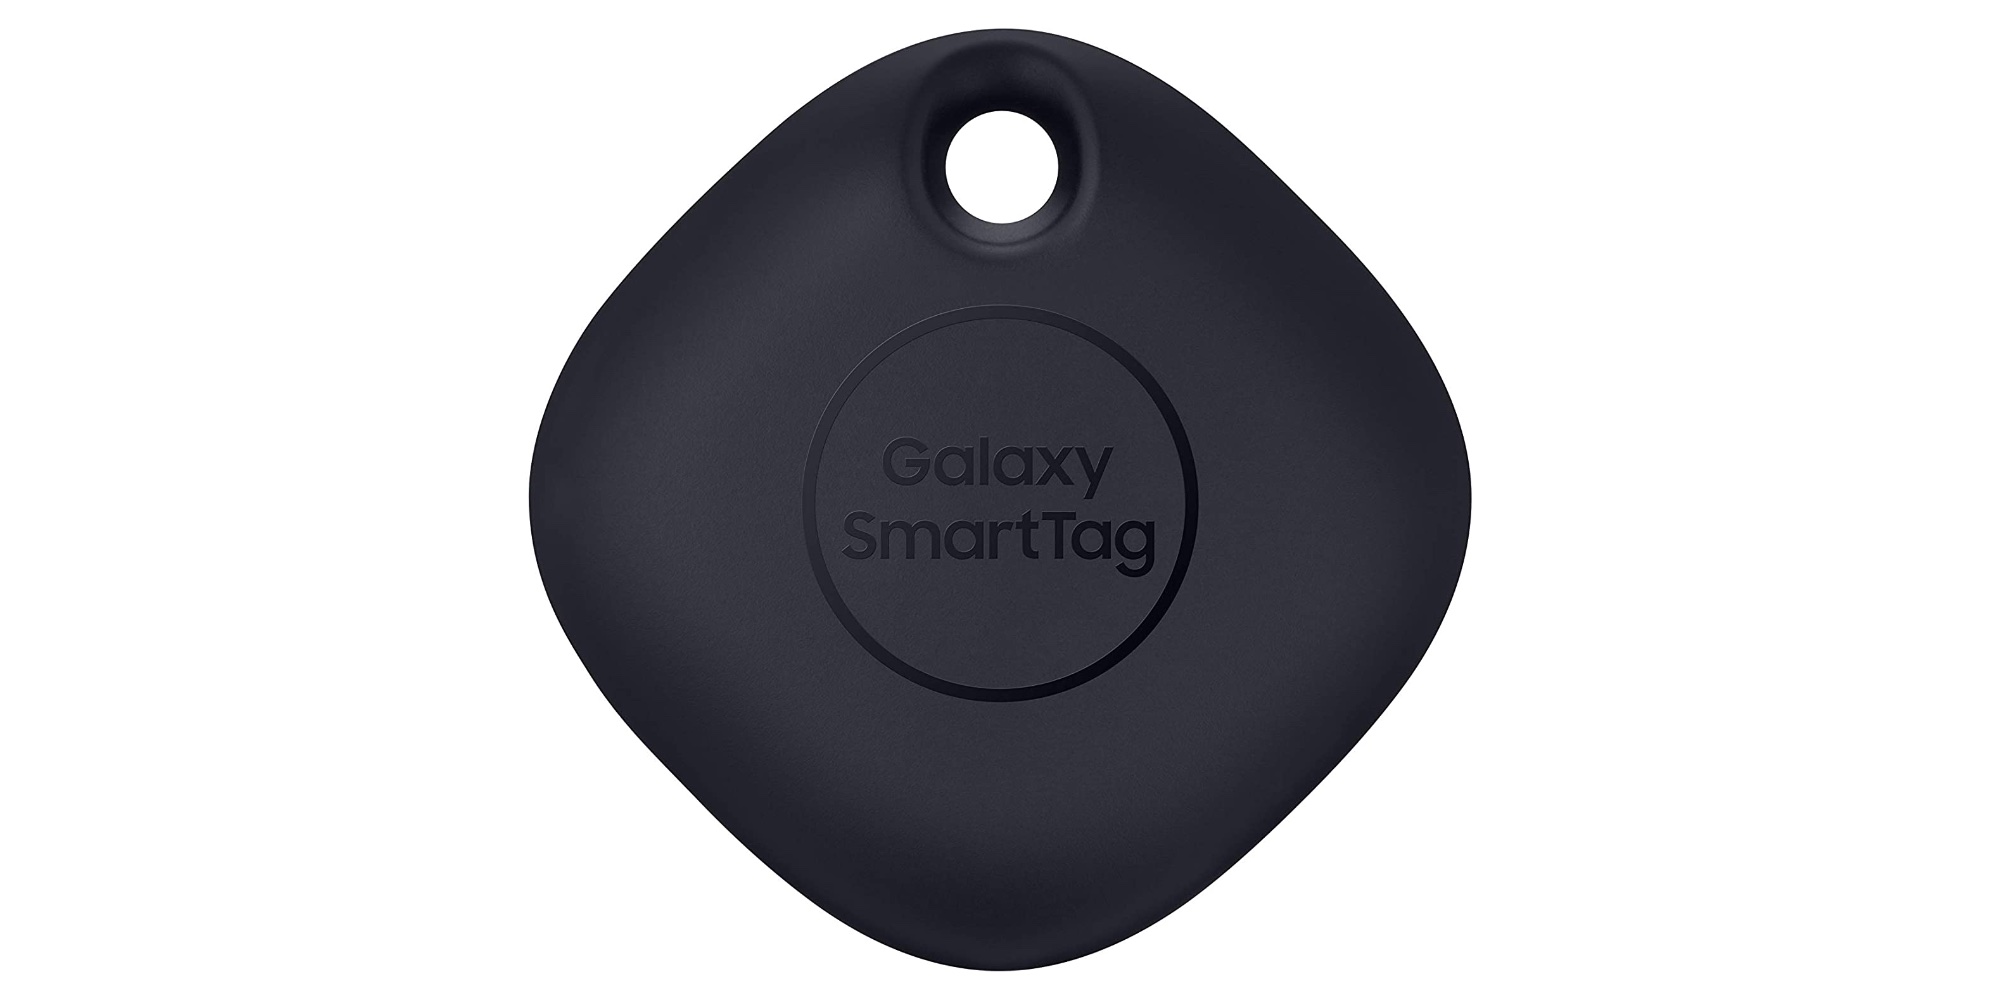 Samsung's Galaxy SmartTag Plus with UWB to track items with AR is out April  16th - The Verge